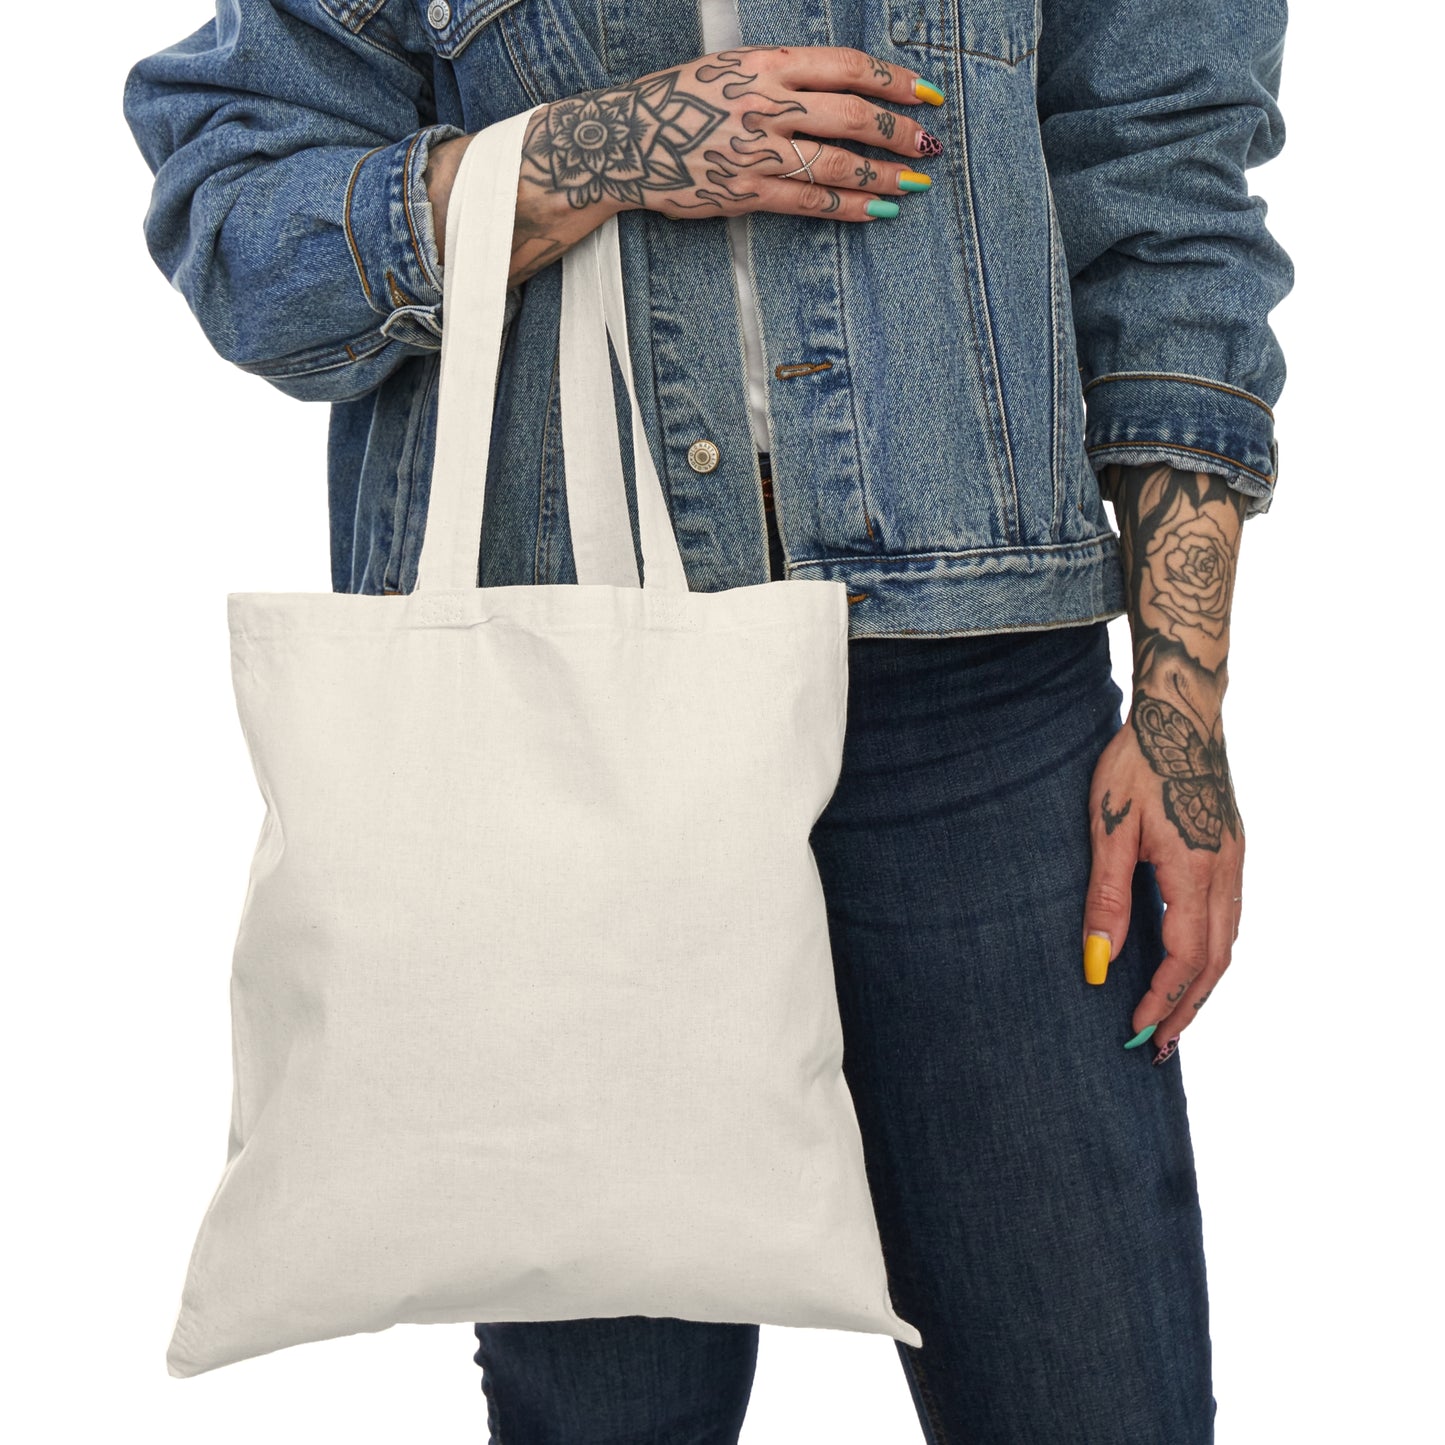 Natural Tote Bag - We Love - A Thousand Elsewhere